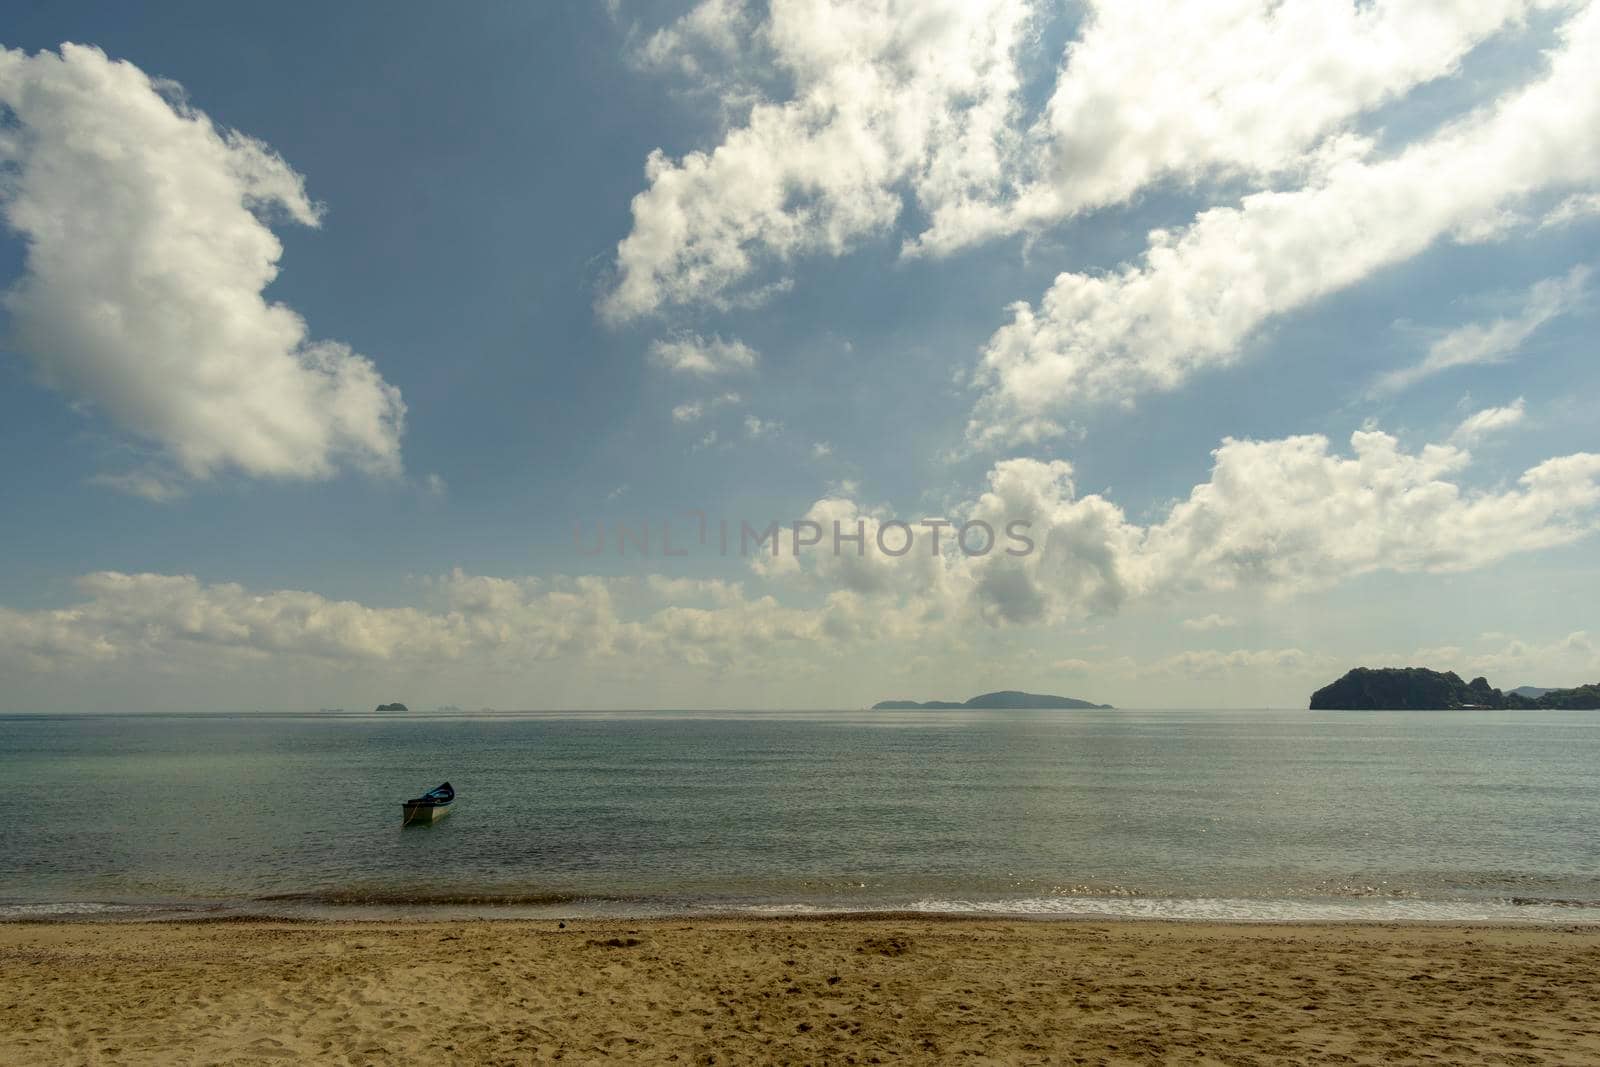 Sea atmosphere at Sairee Beach, Chumphon Province, March 2019.​The sea and the beach at noon. The bright sky, the clouds are white.